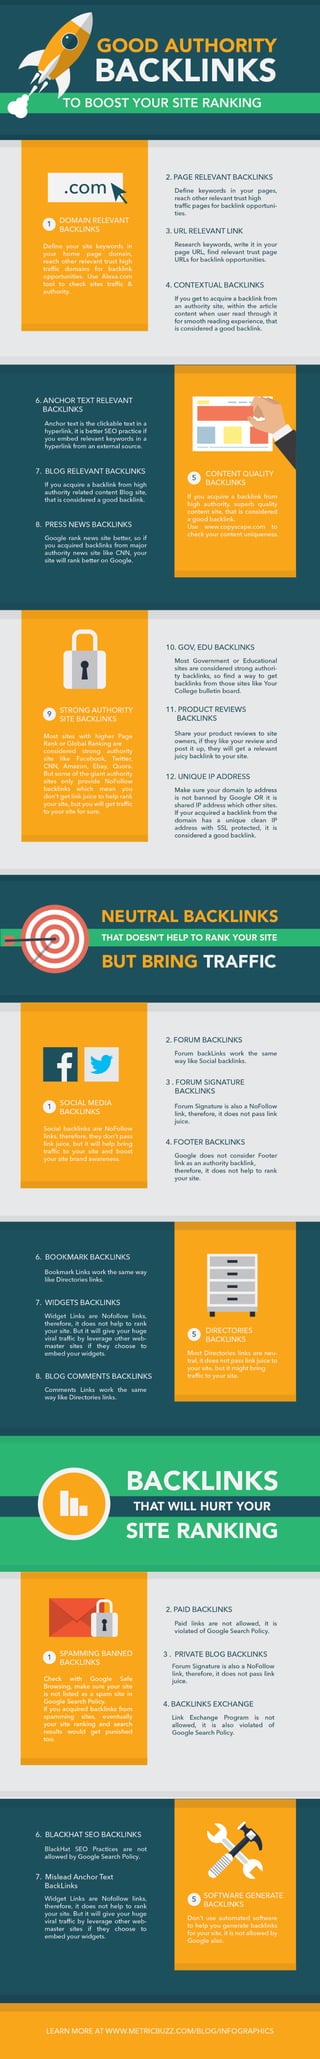 WHAT ARE BACKLINKS